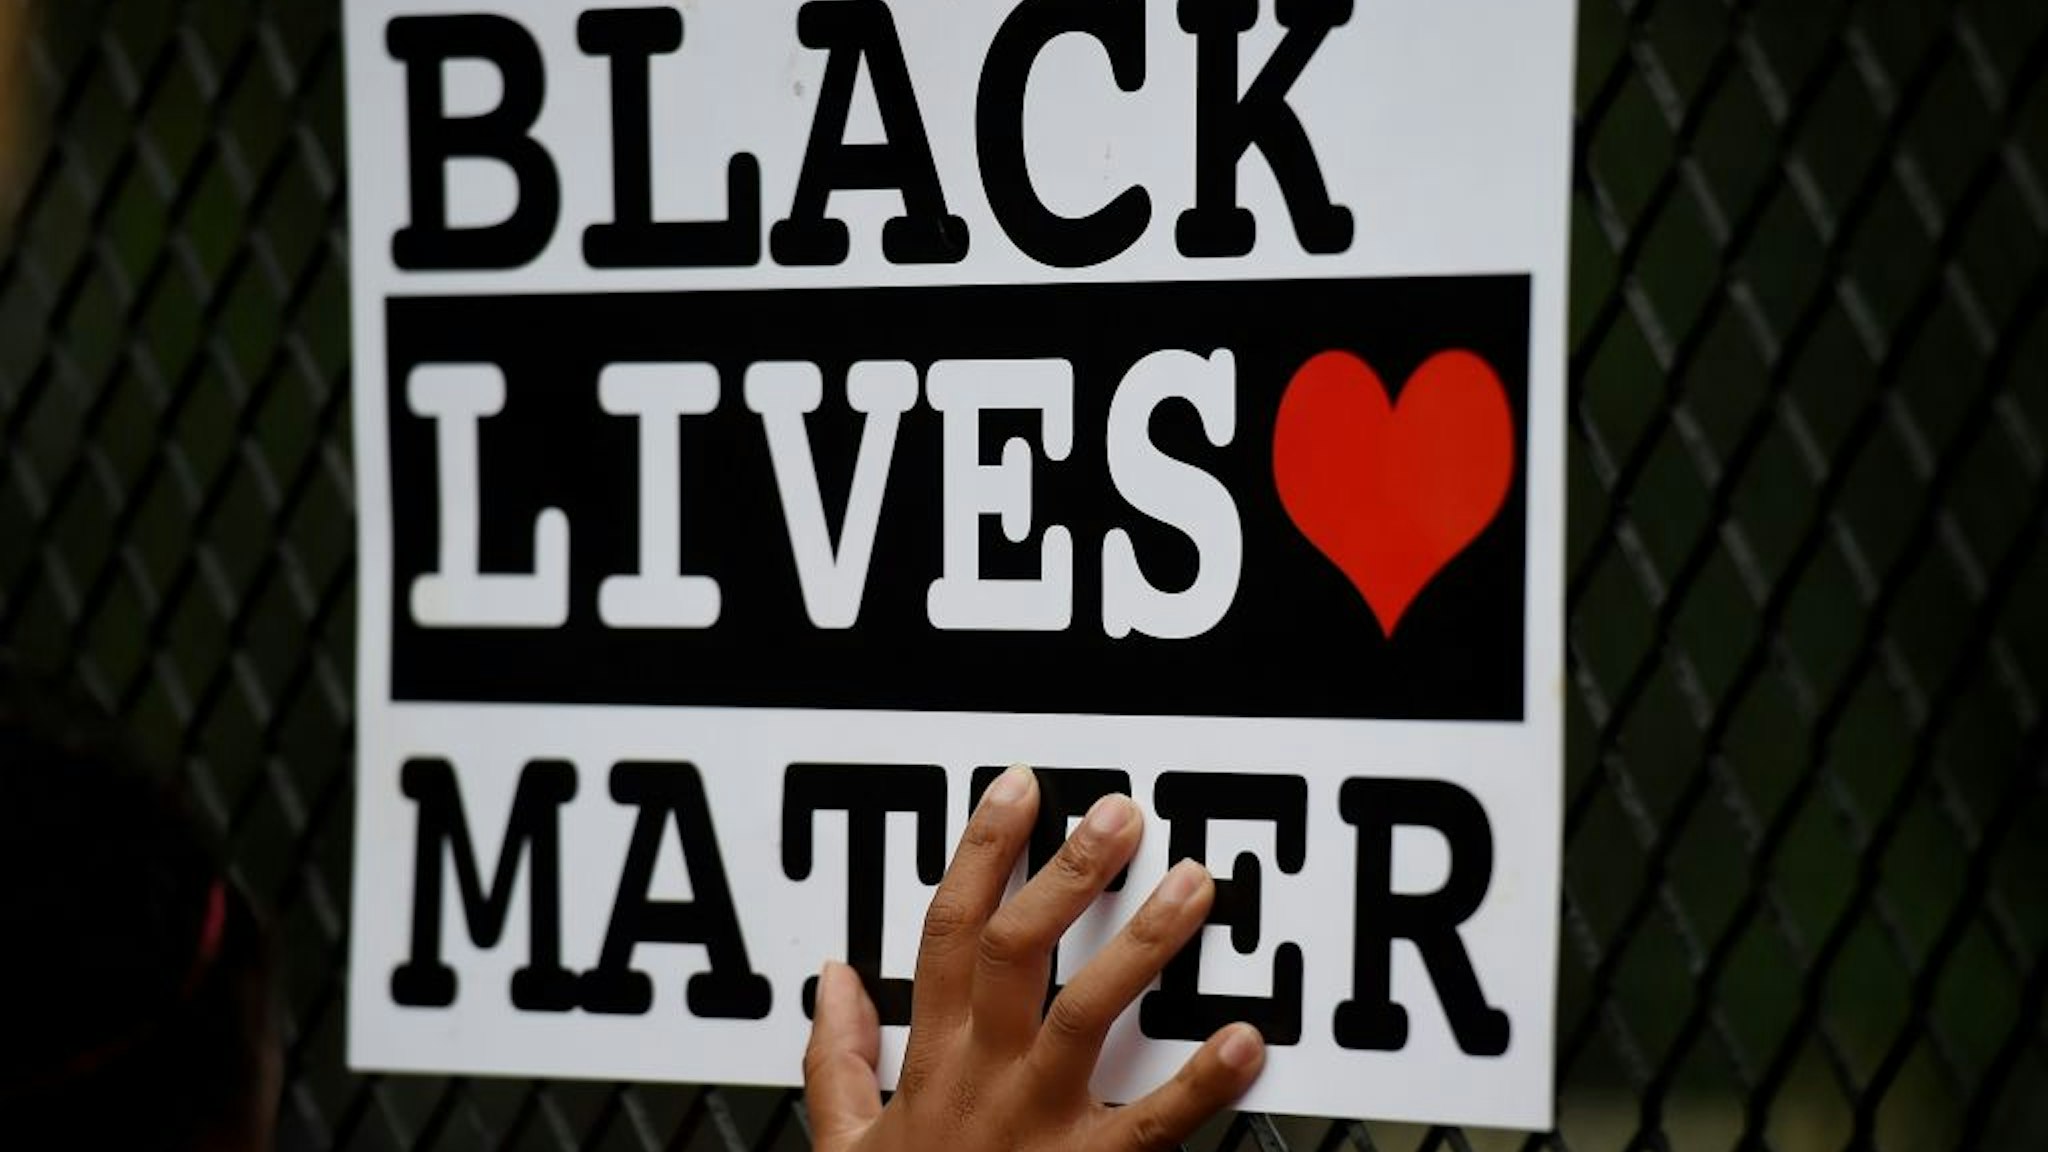 A protestor holds up a Black Lives Matter sign against a recently erected metal fence in front of Lafayette Square near the White House to keep protestors at bay on June 4, 2020 in Washington, DC. - On May 25, 2020, Floyd, a 46-year-old black man suspected of passing a counterfeit $20 bill, died in Minneapolis after Derek Chauvin, a white police officer, pressed his knee to Floyd's neck for almost nine minutes. (Photo by Olivier DOULIERY / AFP) (Photo by OLIVIER DOULIERY/AFP via Getty Images)